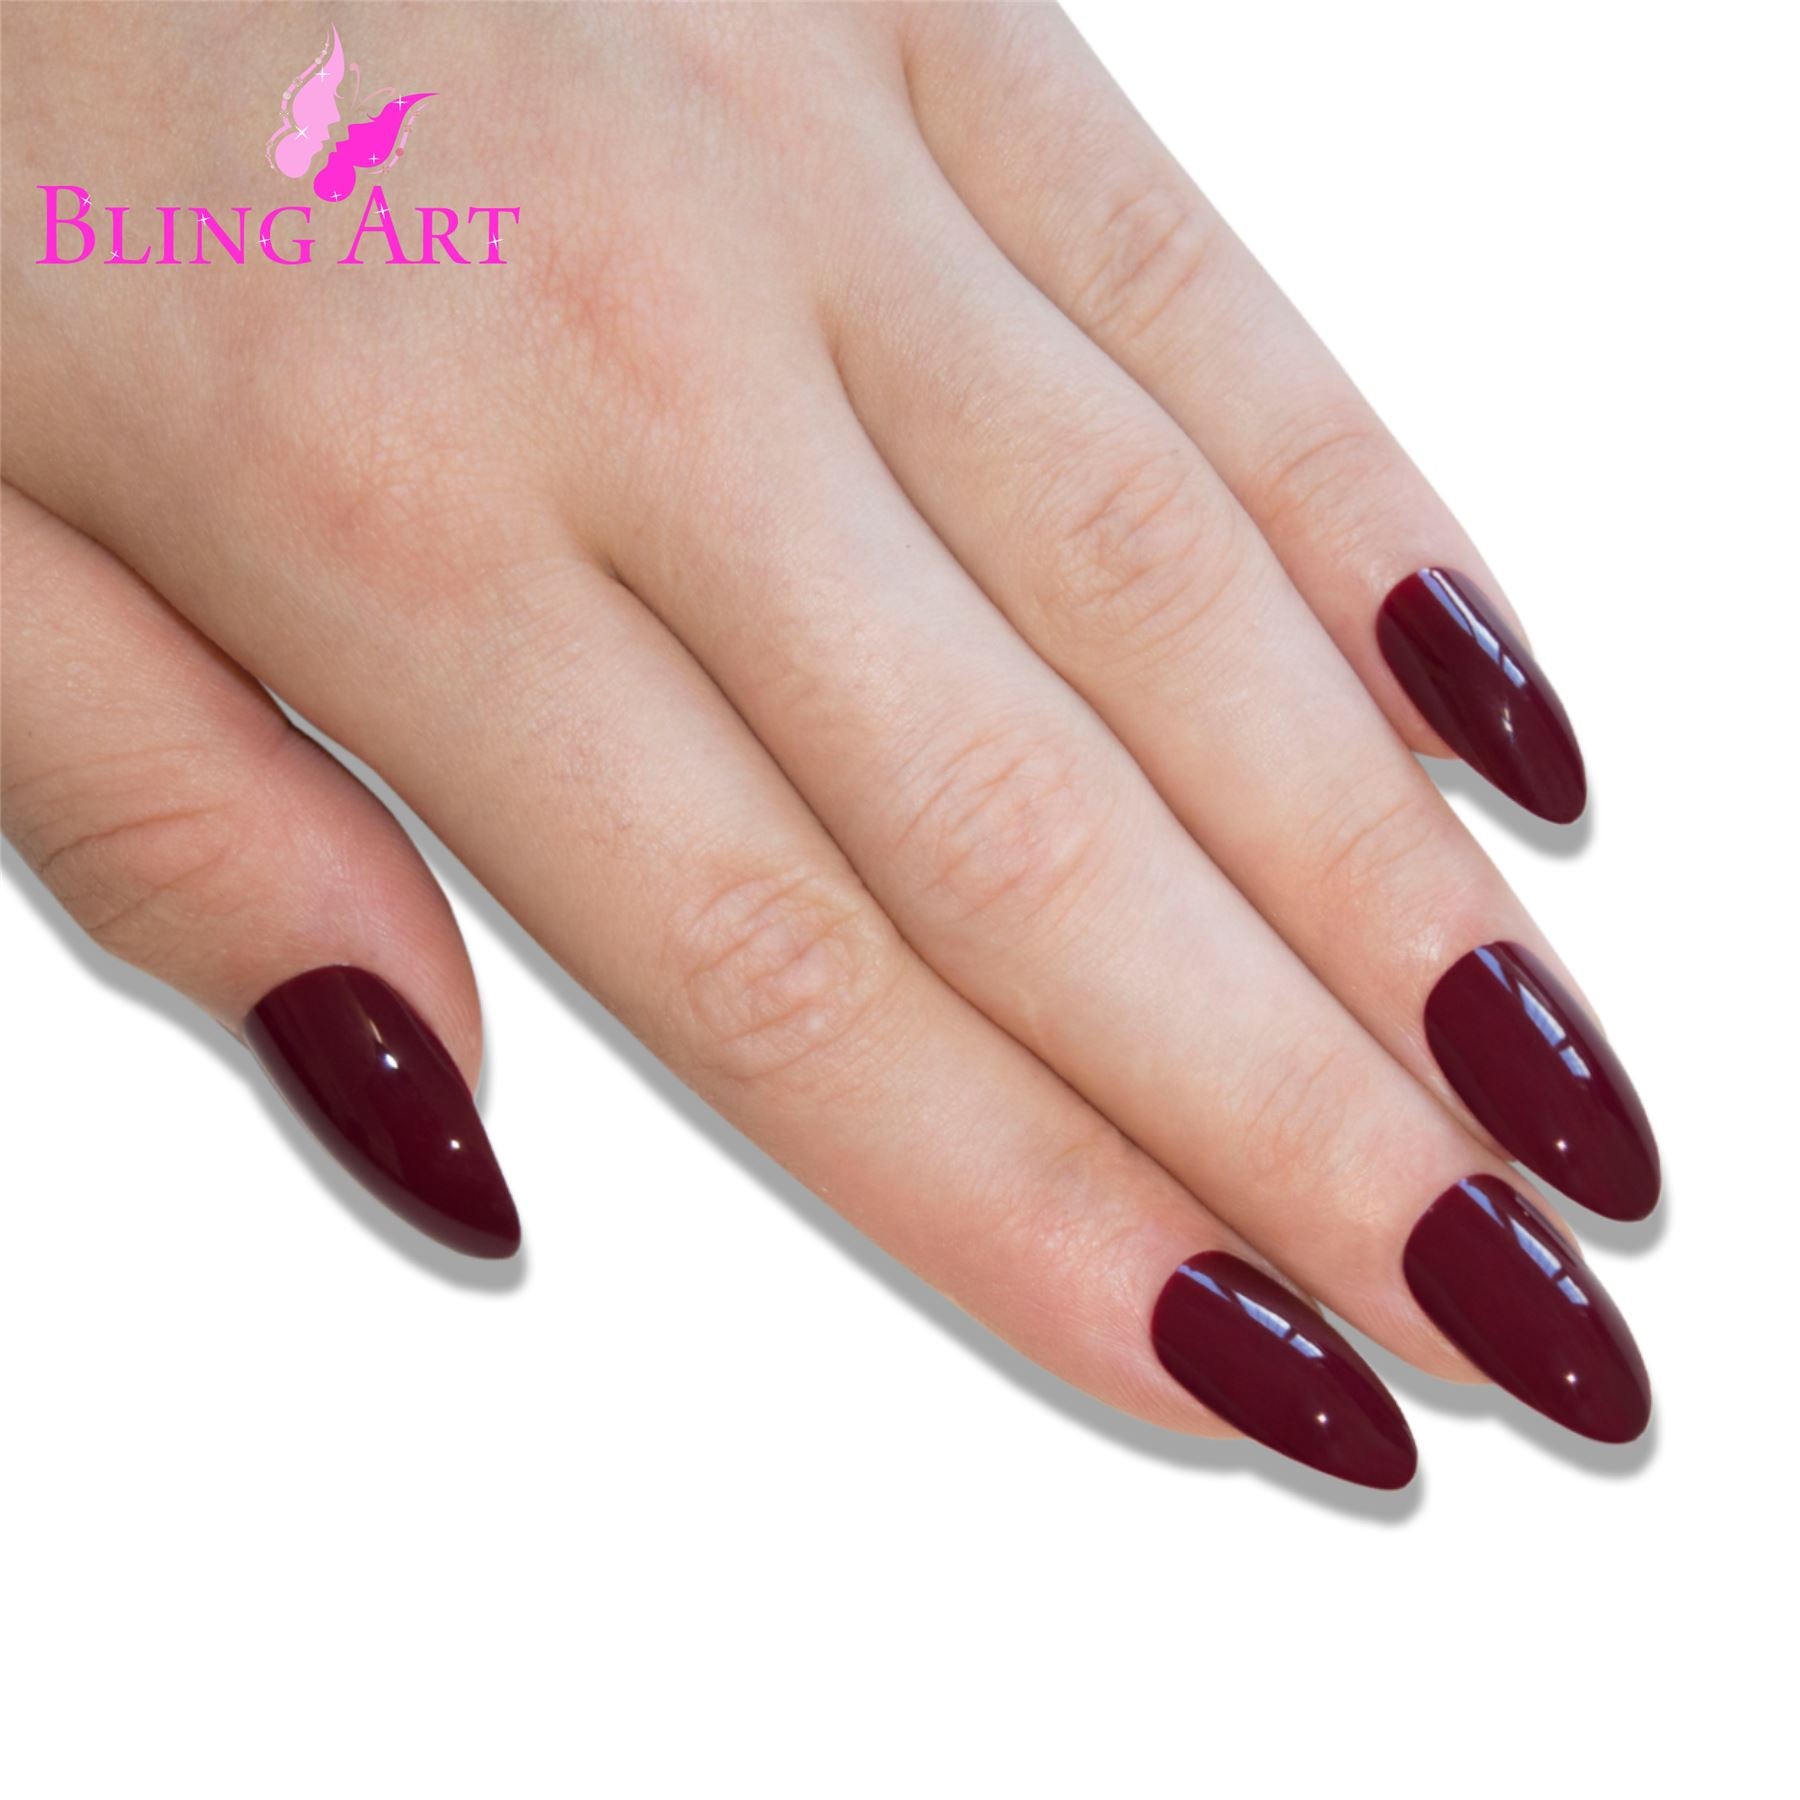 False Nails Bling Art Brown Red Almond Stiletto Long Fake Acrylic Tips with Glue